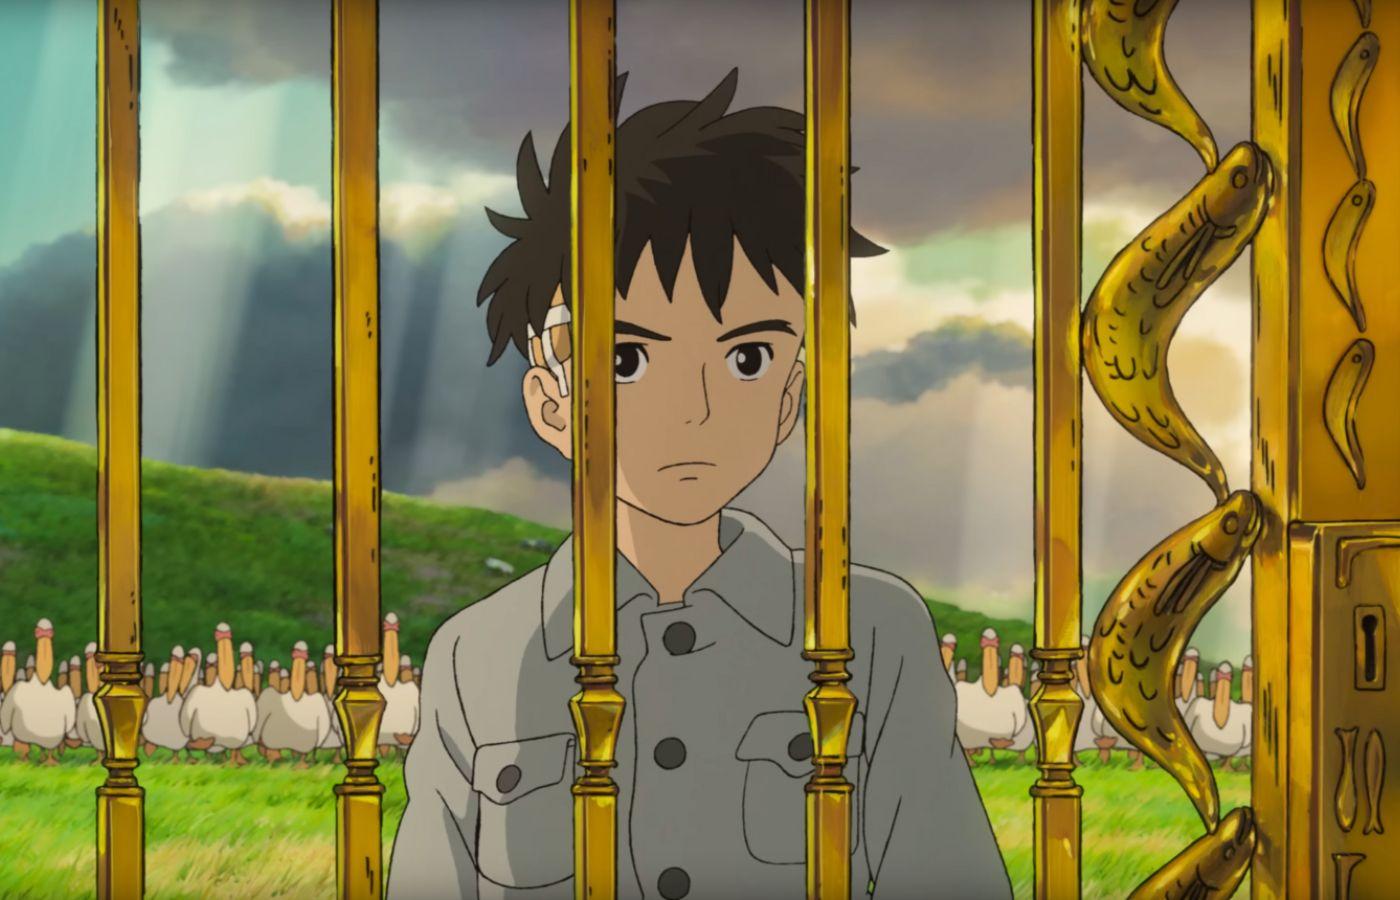 Mahito in The Boy and the Heron